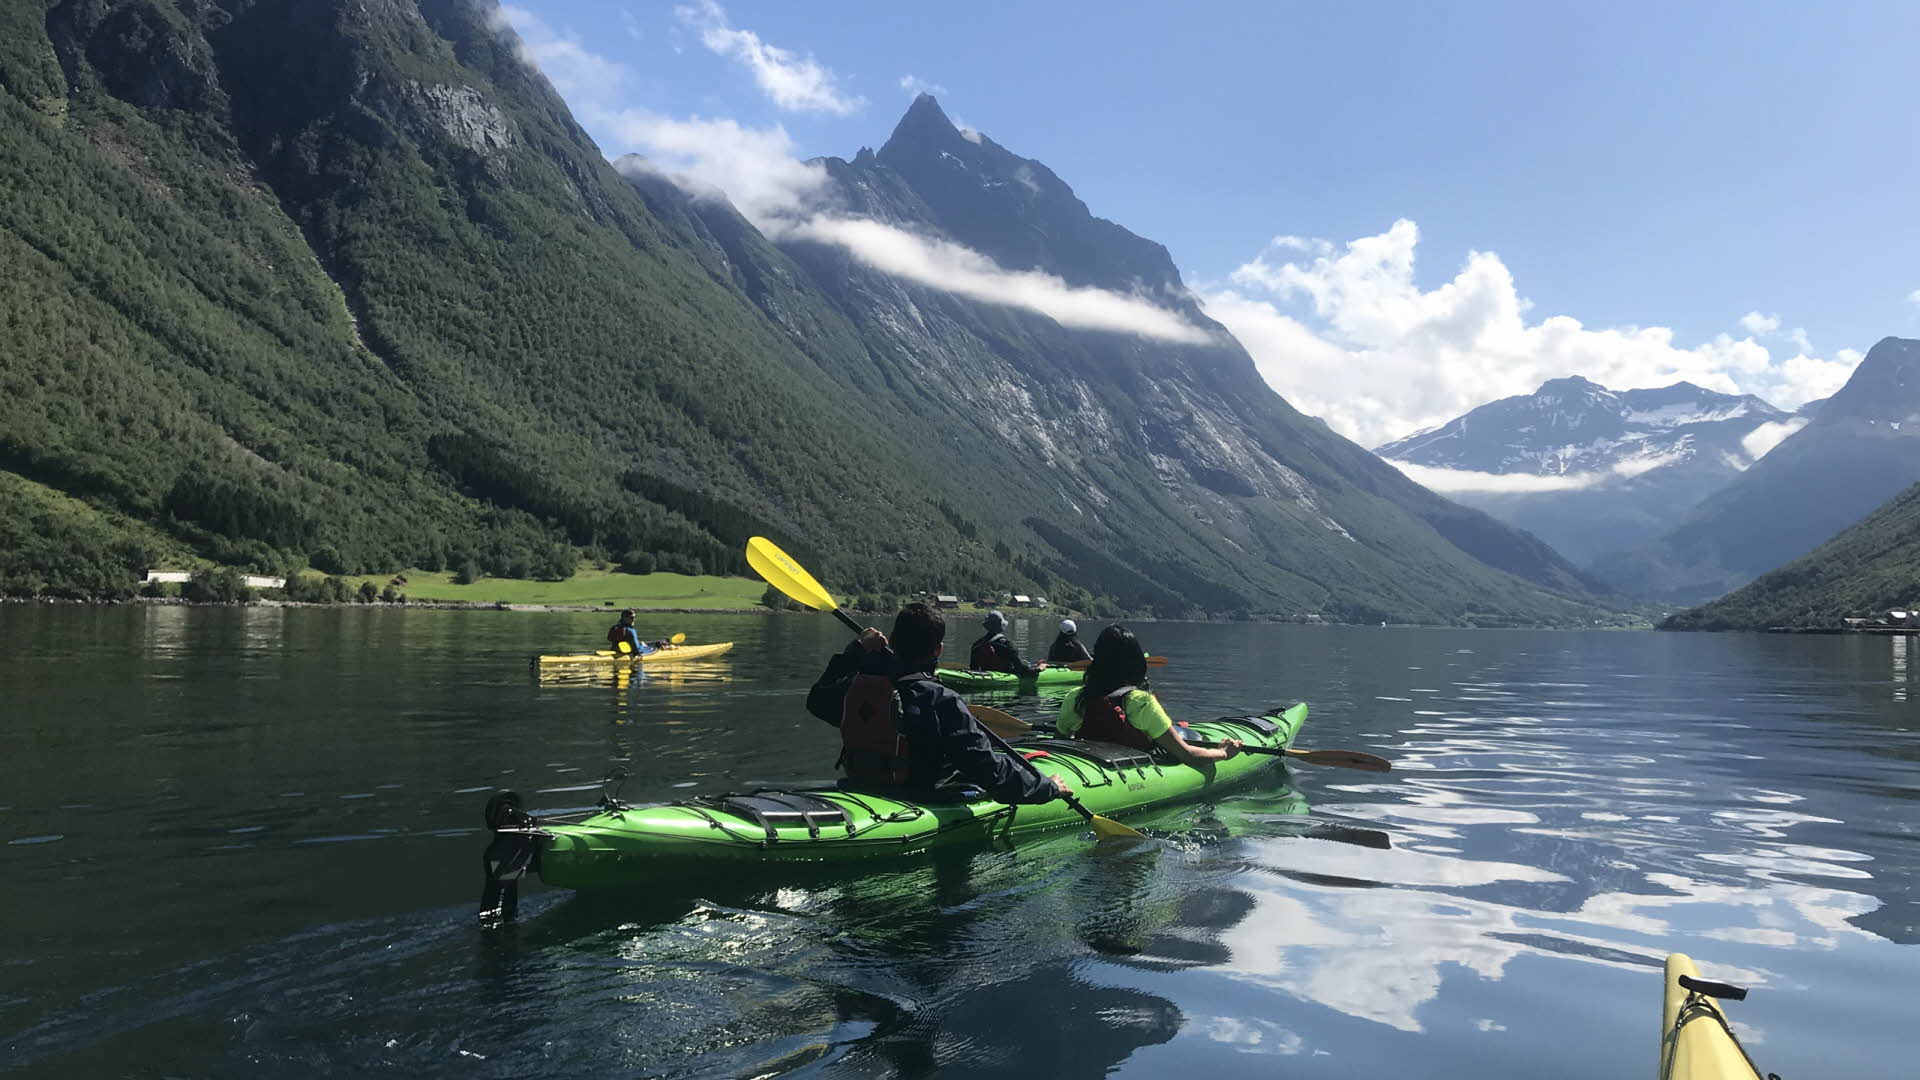 Two people in the tandem kayak paddling at the Norangfjord